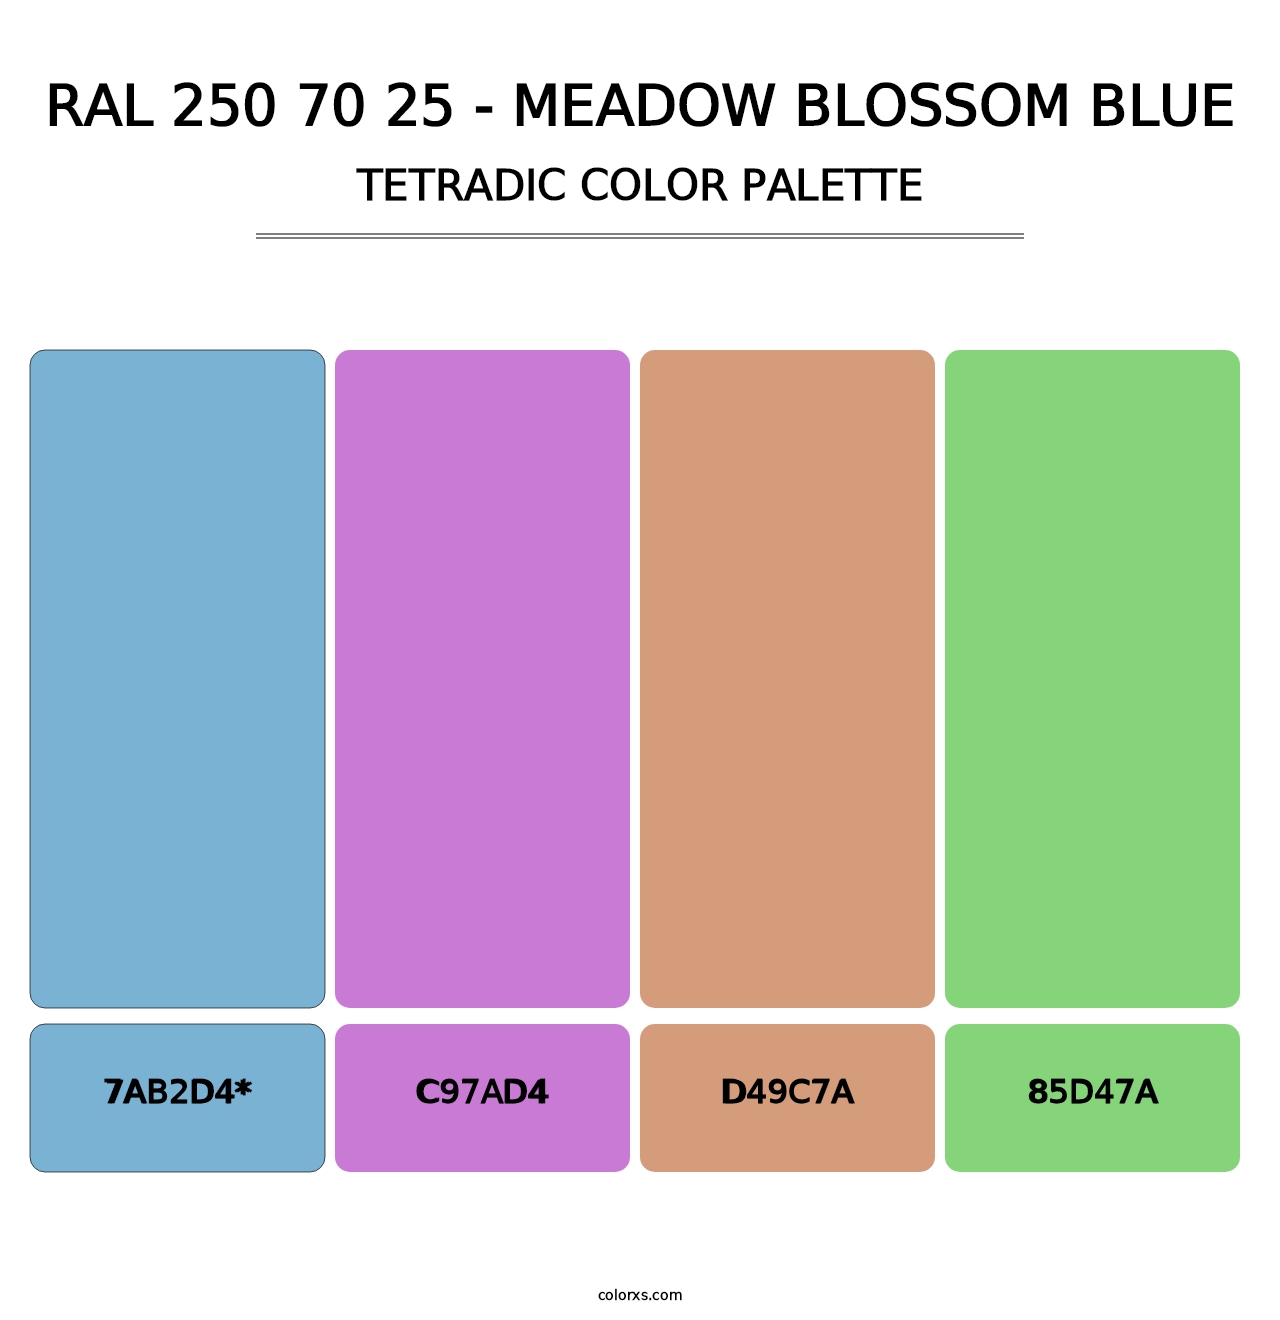 RAL 250 70 25 - Meadow Blossom Blue - Tetradic Color Palette